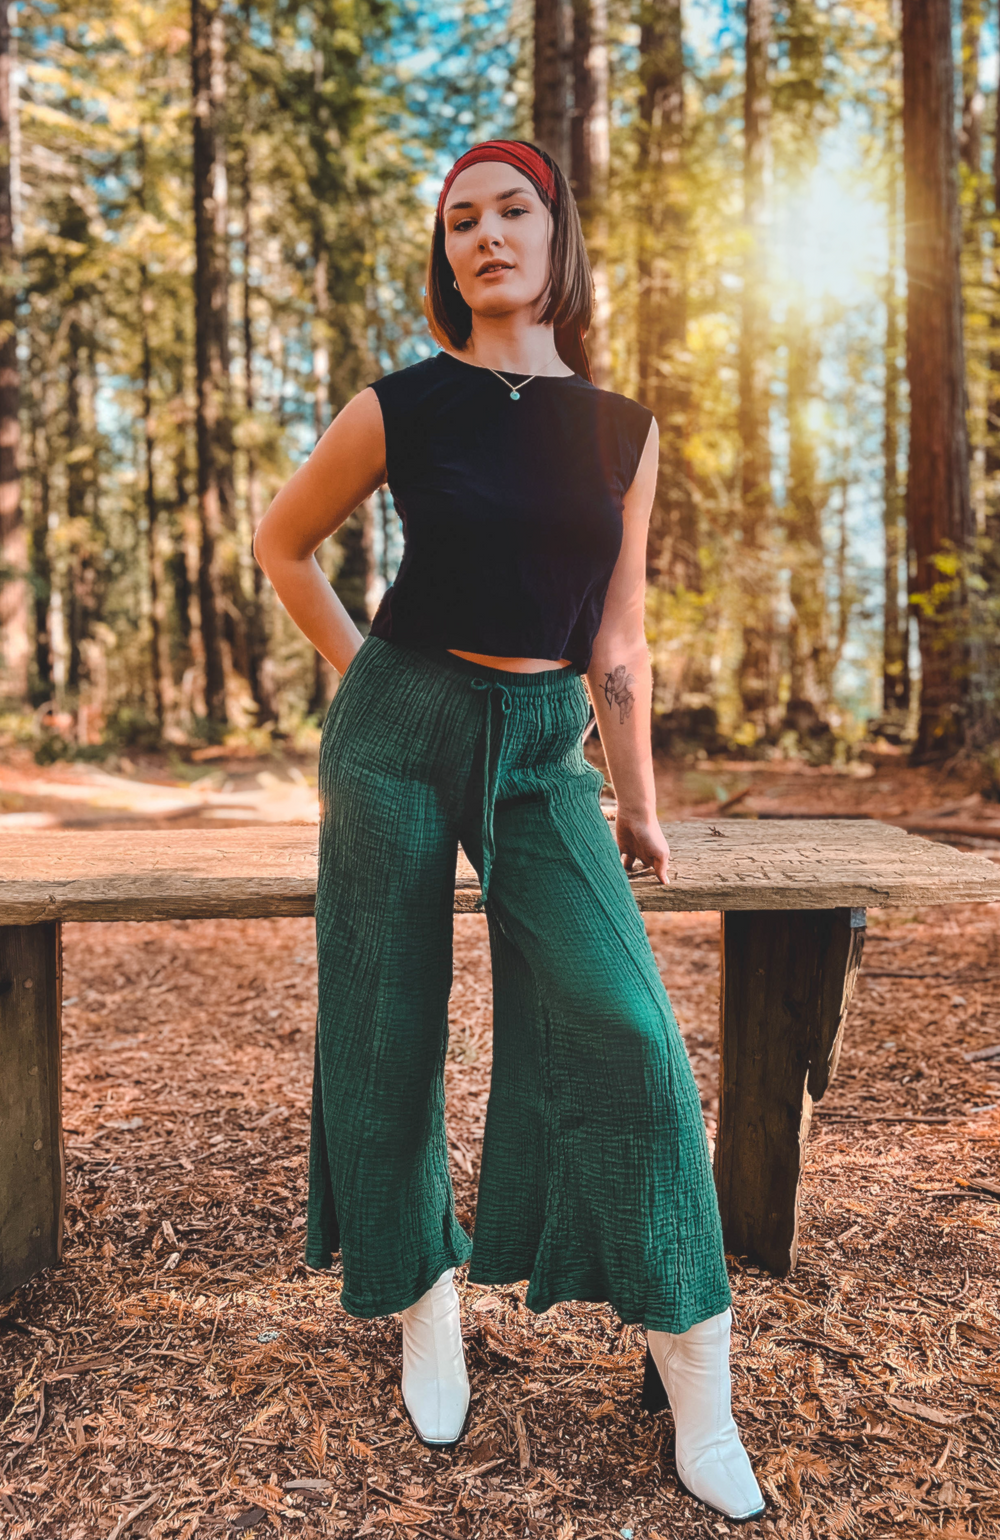 Woman wears black crop tank top with emerald green pants and white boots.